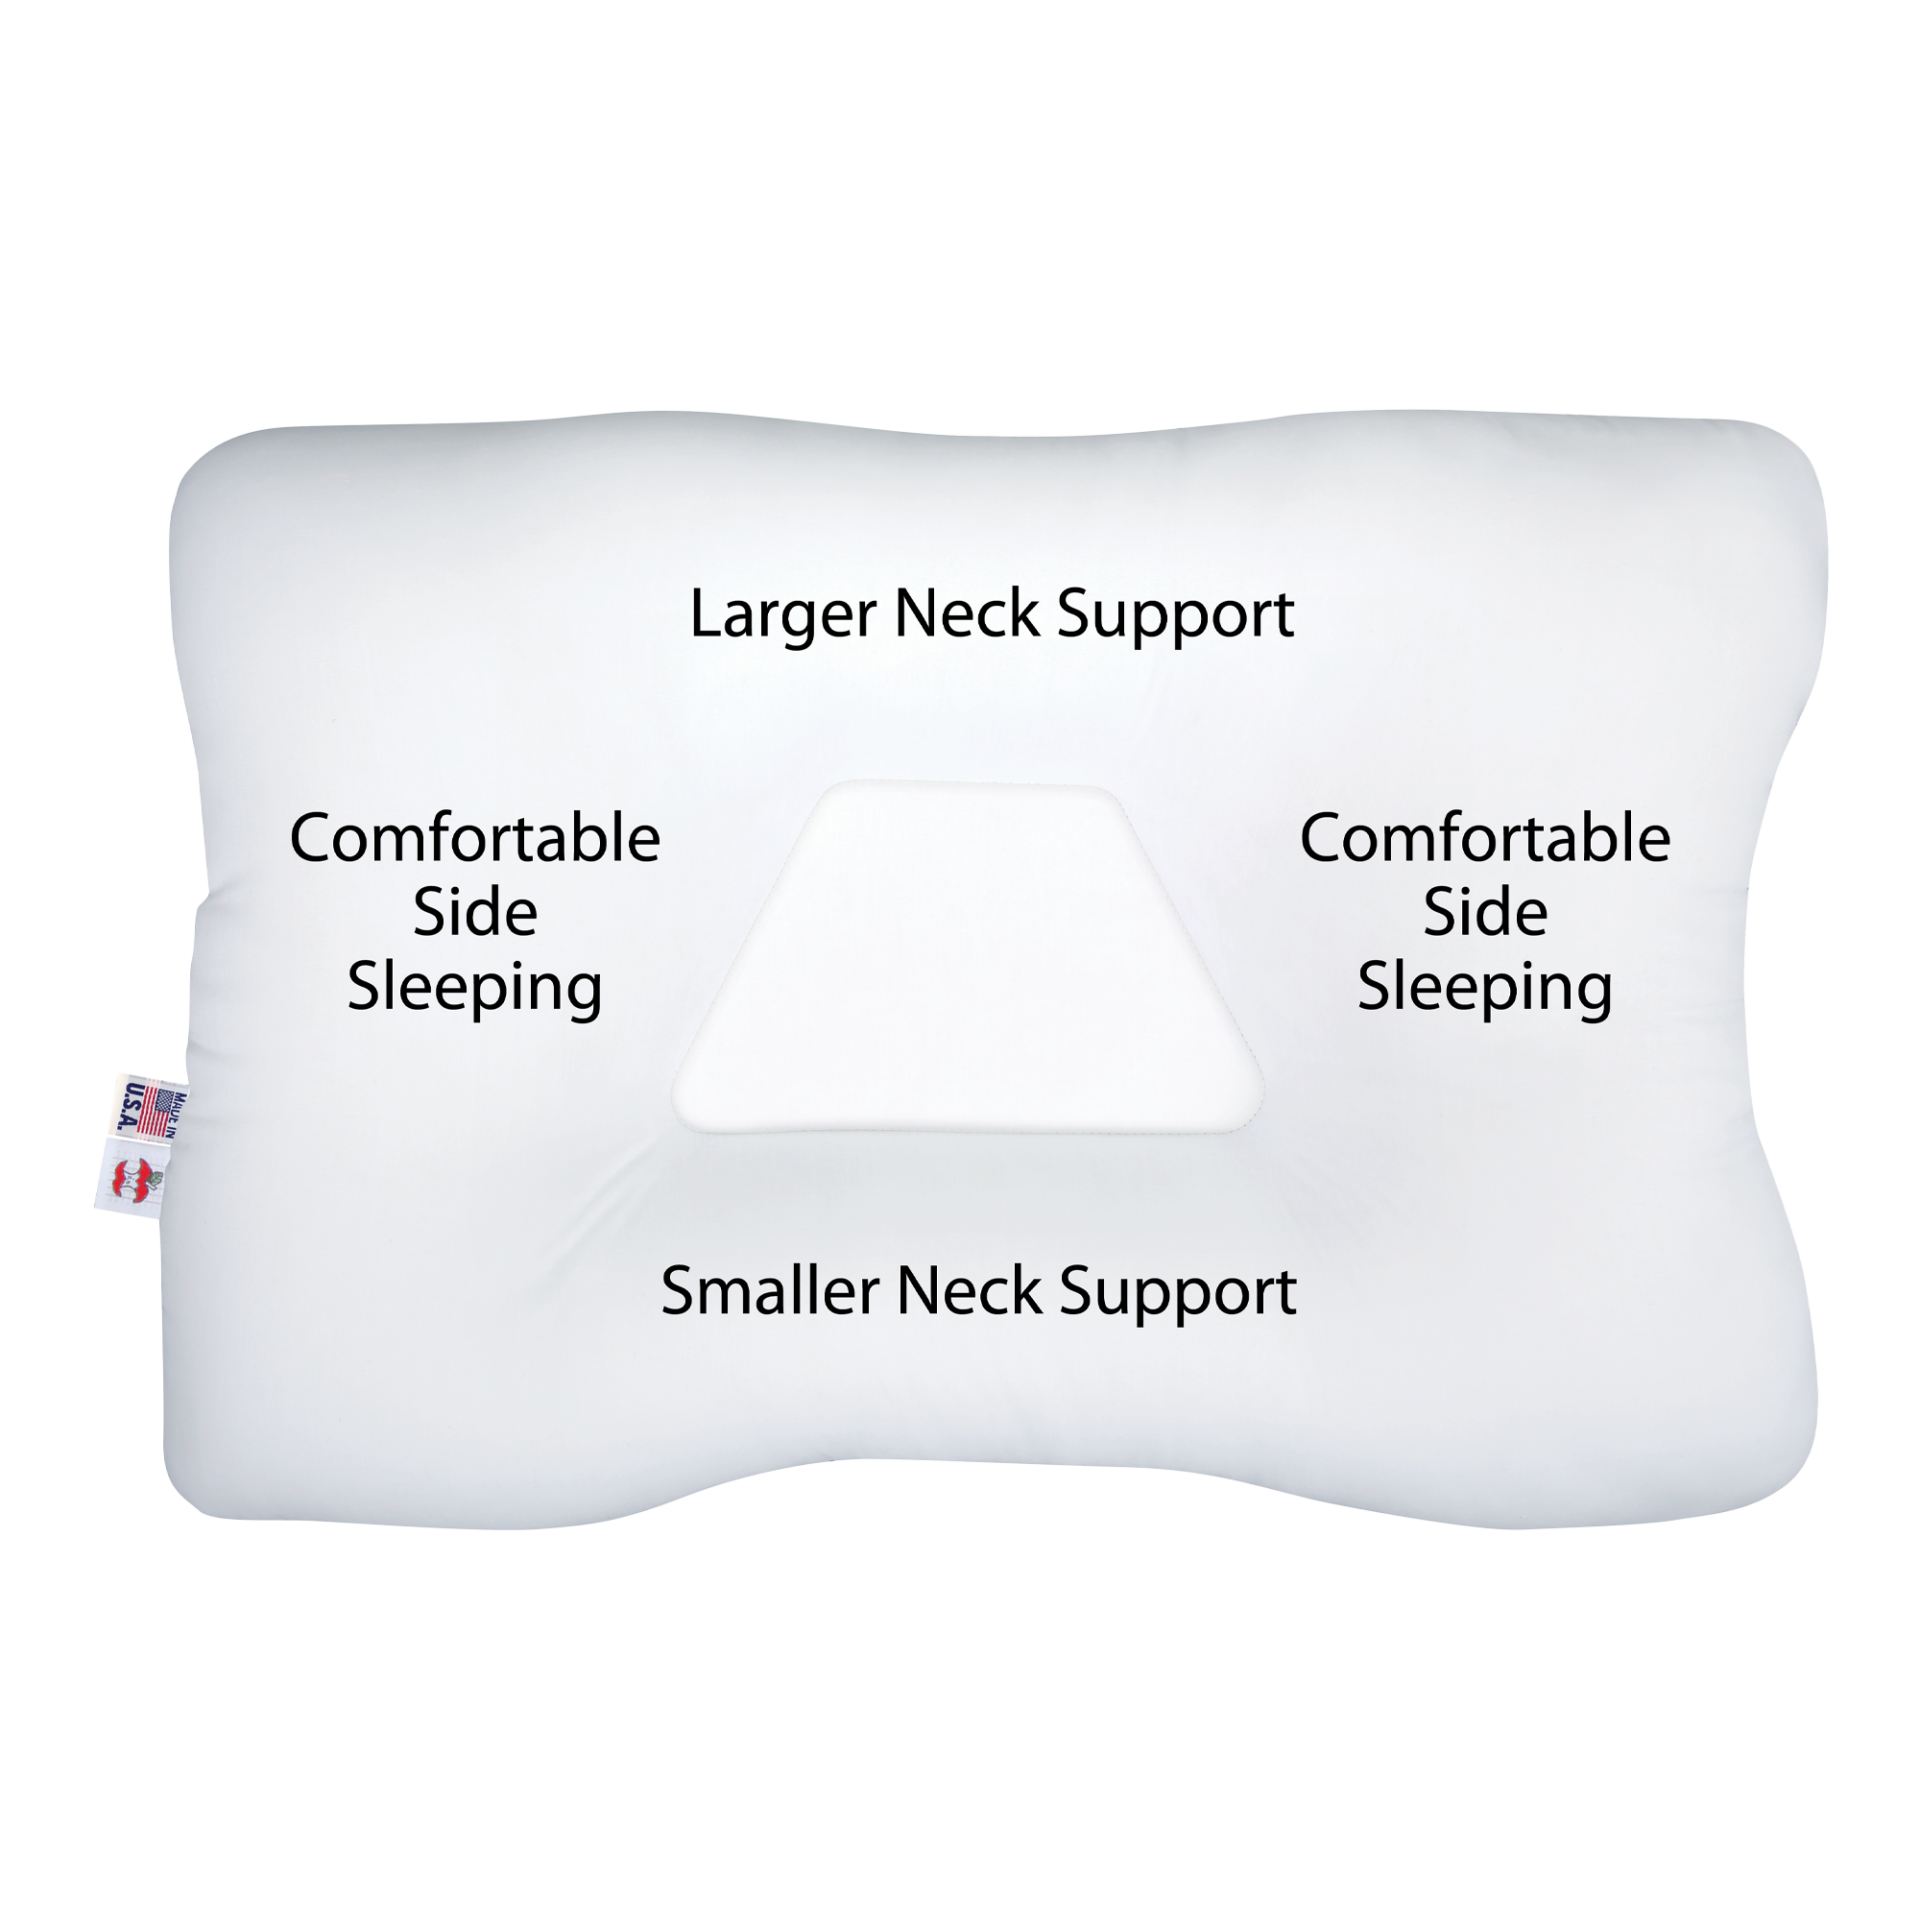 https://www.chiro1source.com/wp-content/uploads/2021/05/fib-200-222-tri-core-cervical-pillow-white-front-with-callouts-coreproducts_2000x2000_crop_center_070740d7-bfd7-4573-bf32-58aa46db3333.png